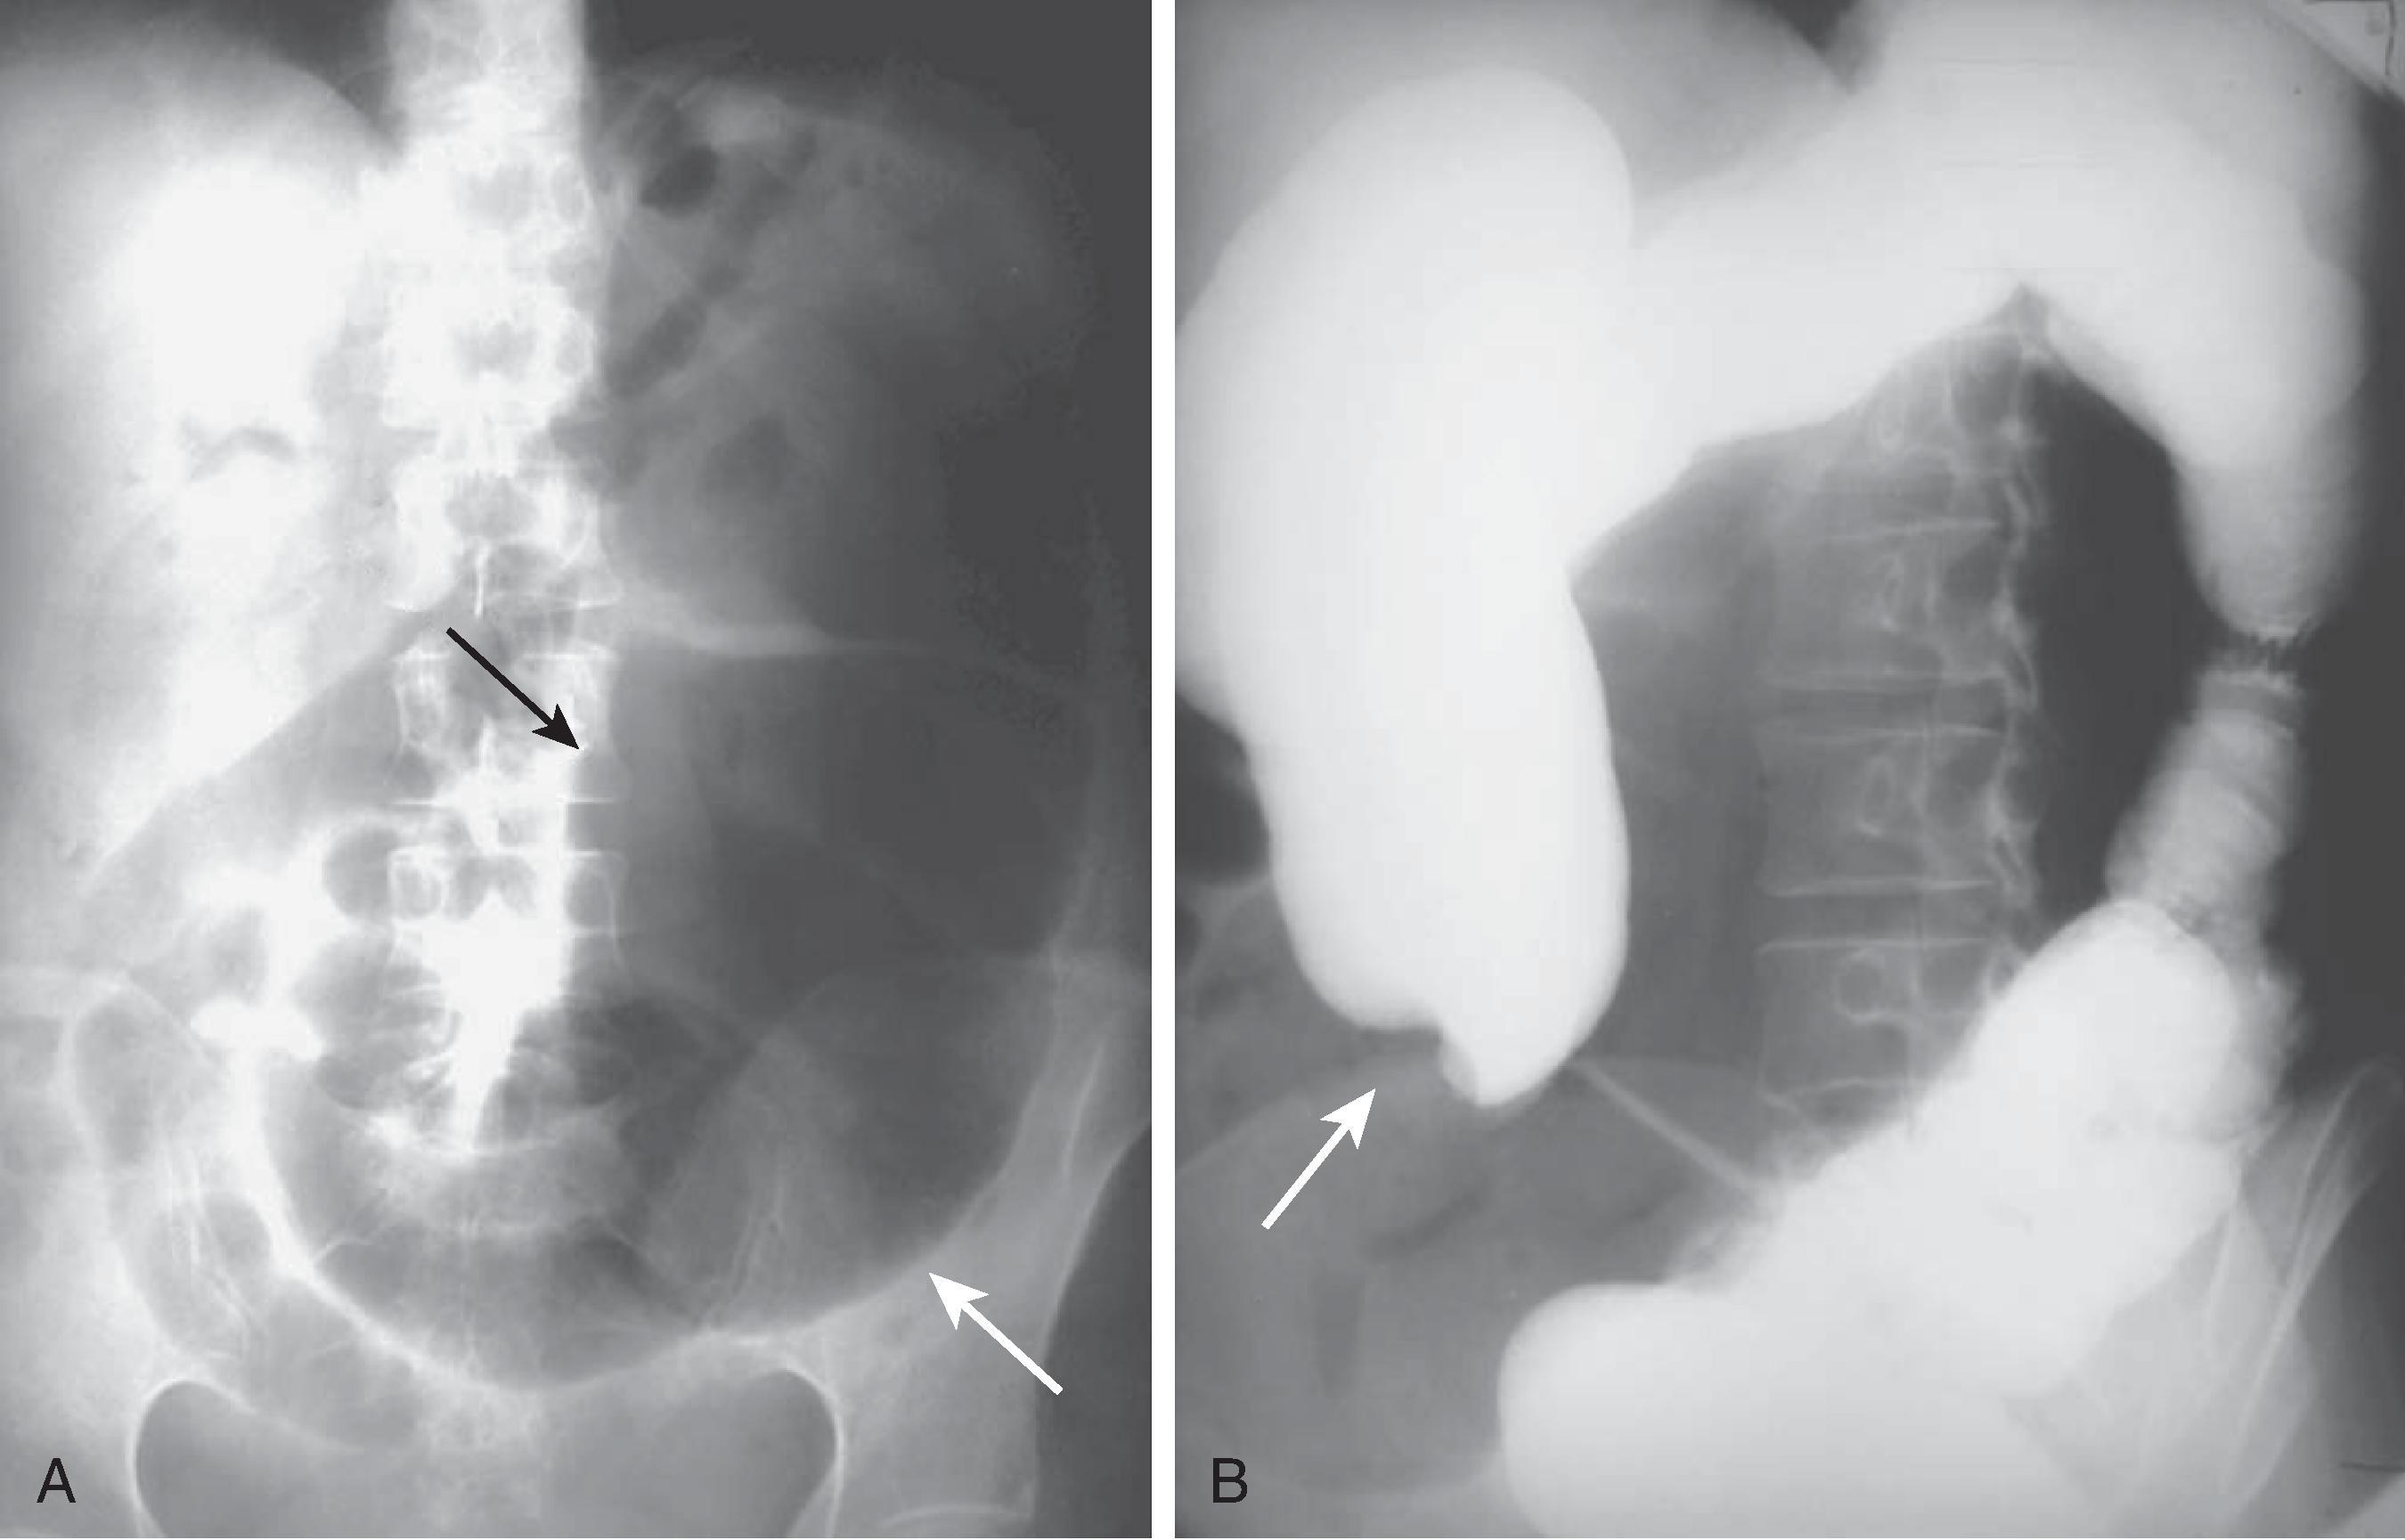 Fig. 46.5, Cecal volvulus: plain radiograph and barium enema features. (A) A distended cecum (arrows) is present in the left lower quadrant. Dilated small bowel is evident proximally. There is a relative paucity of colonic gas distal to the volvulus. (B) Barium enema shows the contrast column ending abruptly (arrow) at the level of the twist.